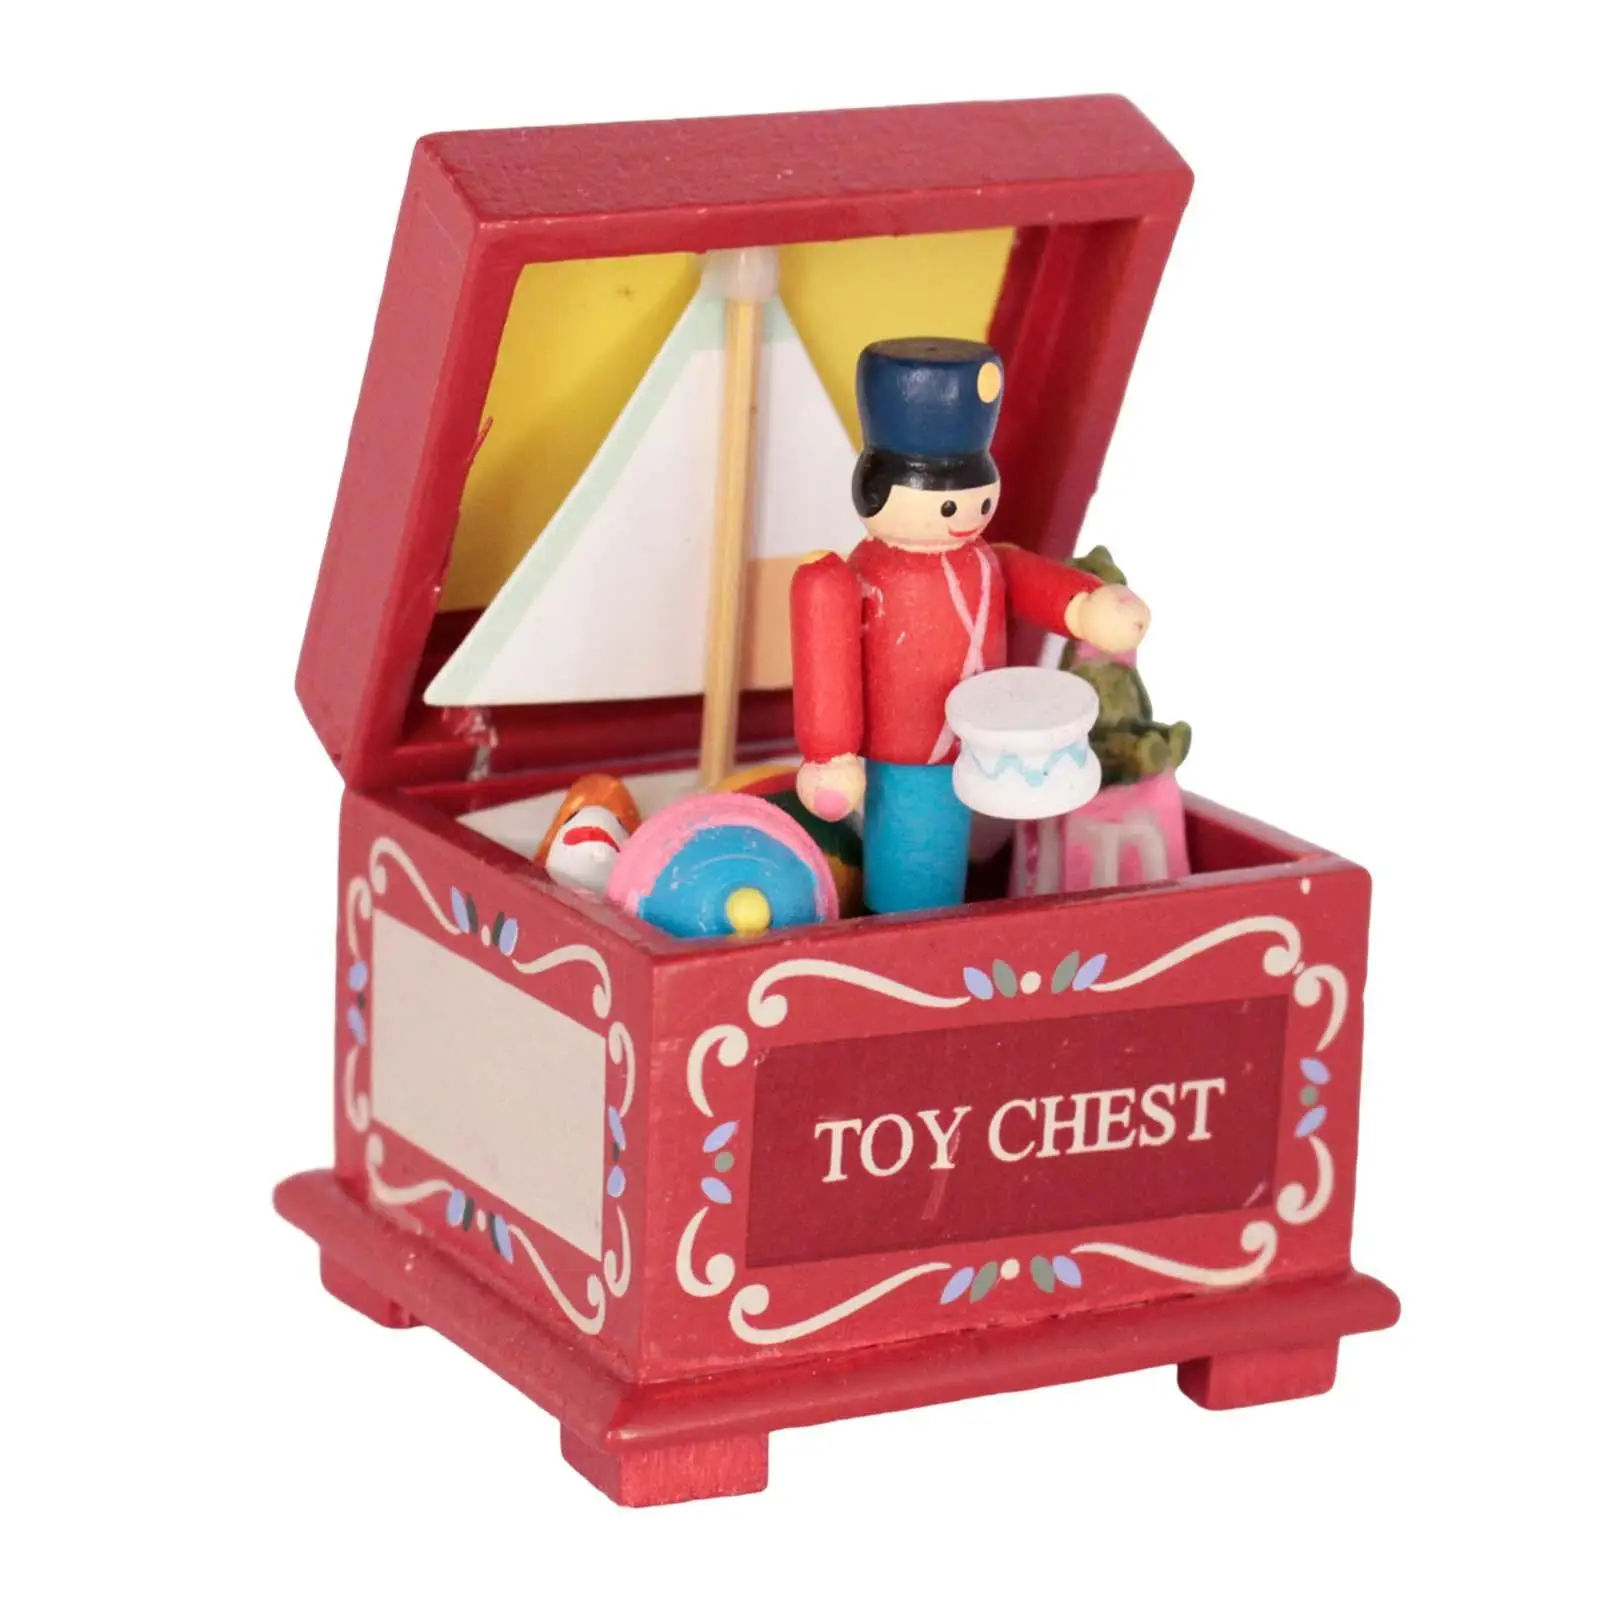 1:12 Dollhouse Toys Chest Full of Toys Ornament Miniature for Dollhouse Accessories Micro Landscape Pretend Toy Collectibles